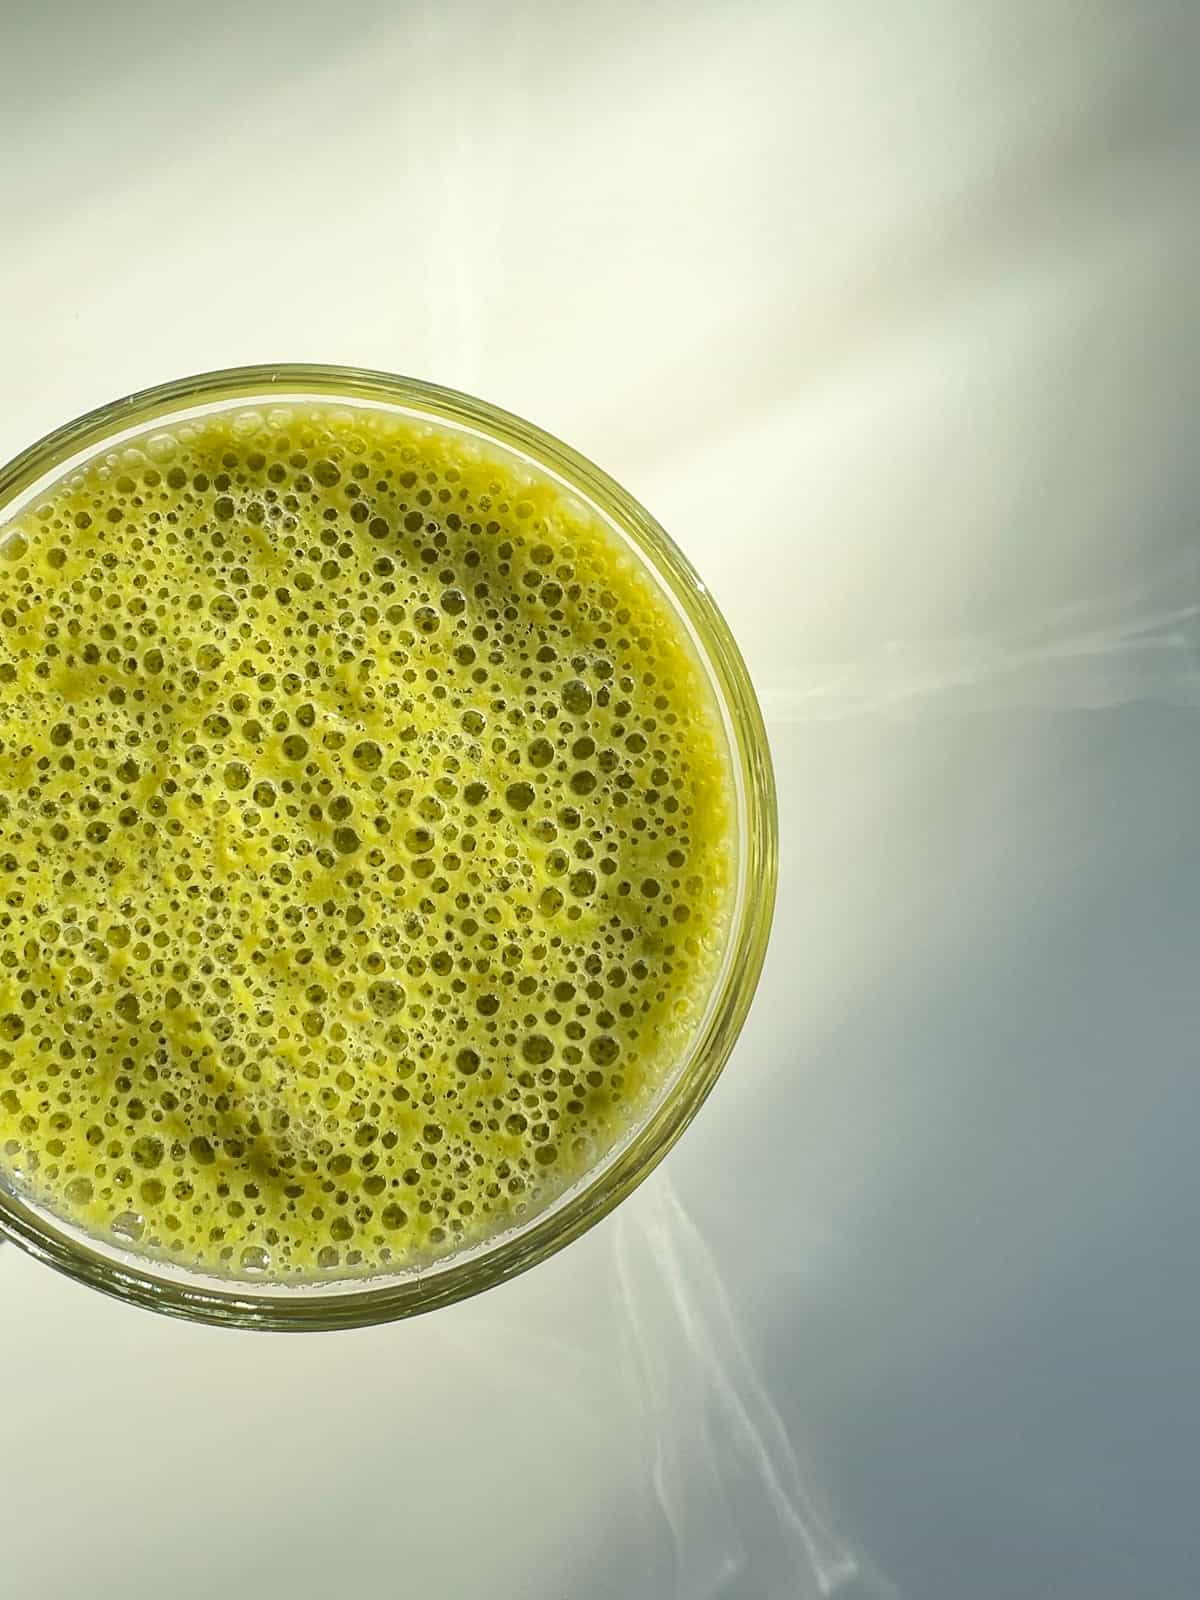 An image of a green smoothie as seen from above.